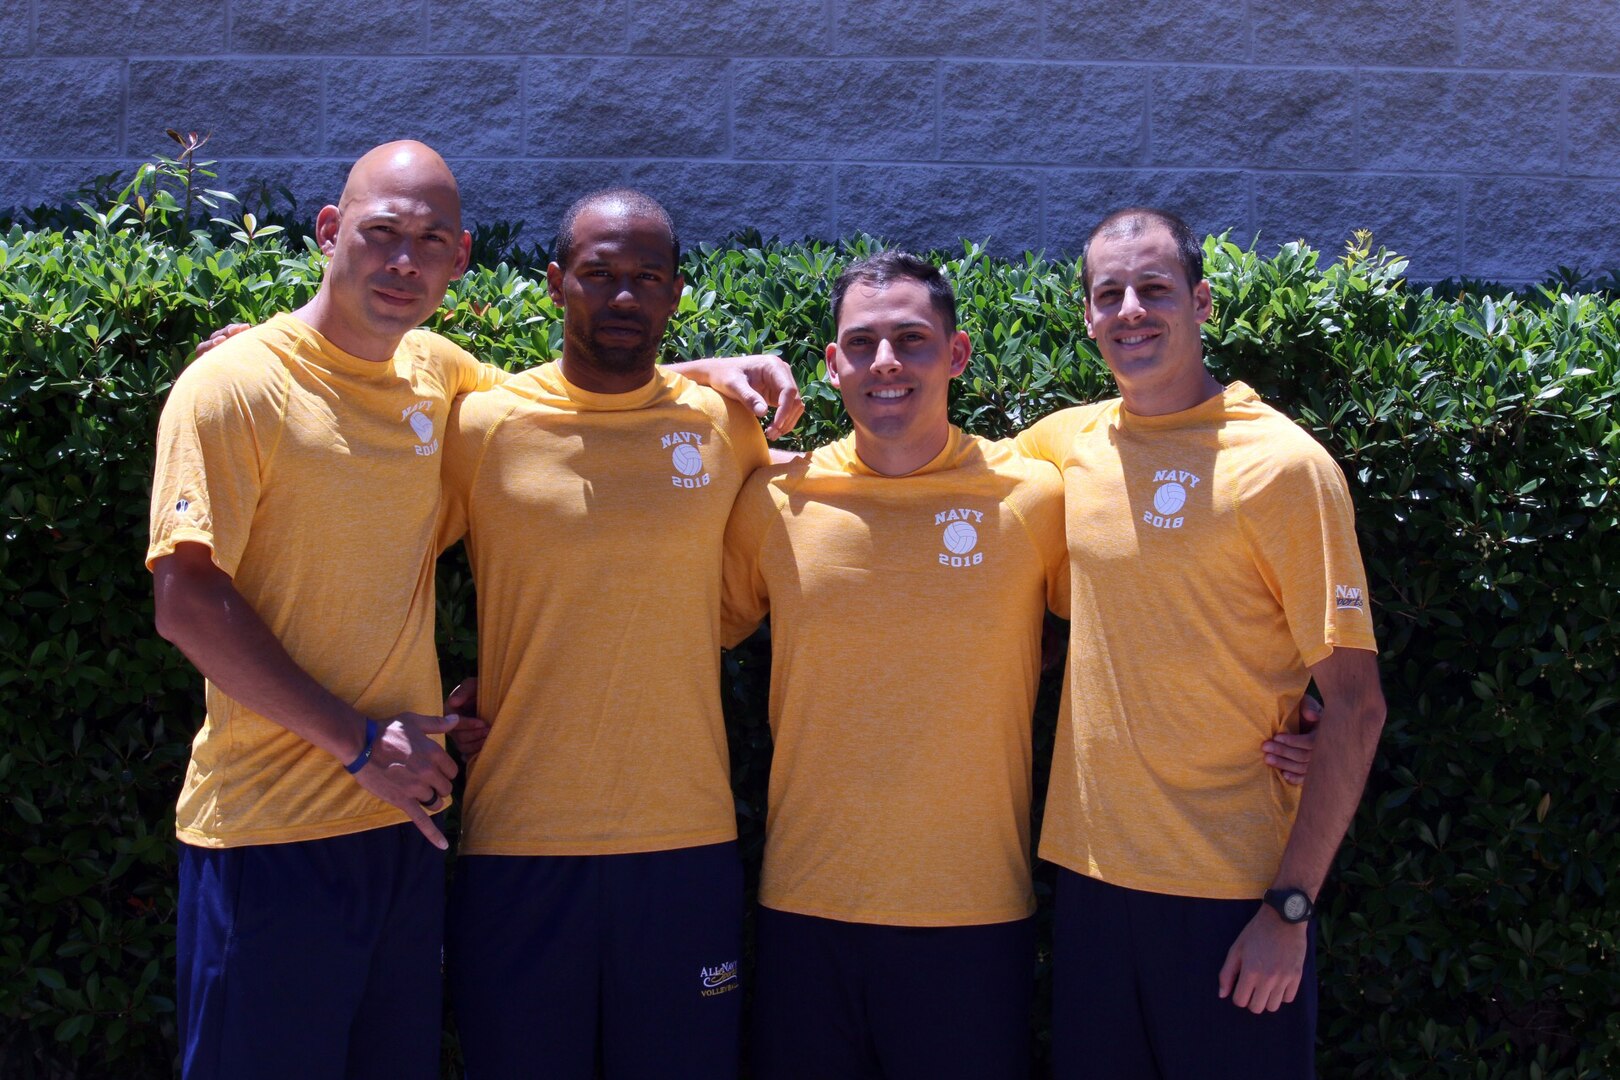 HURLBURT FIELD, Fla. –  All-Navy Volleyball players Chief Petty Officer Aniahau Desha from Hilo, Hawaii, Hospitalman Gaston Yescas from Tucson, Ariz., Petty Officer 1st Class Sheldon Lucius from Pearl City, Hawaii, and Petty Officer 3rd Class Joshua Essick from Harrisburg, Pa. risked themselves to save the lives of two teenage girls at Naval Station Mayport beach.